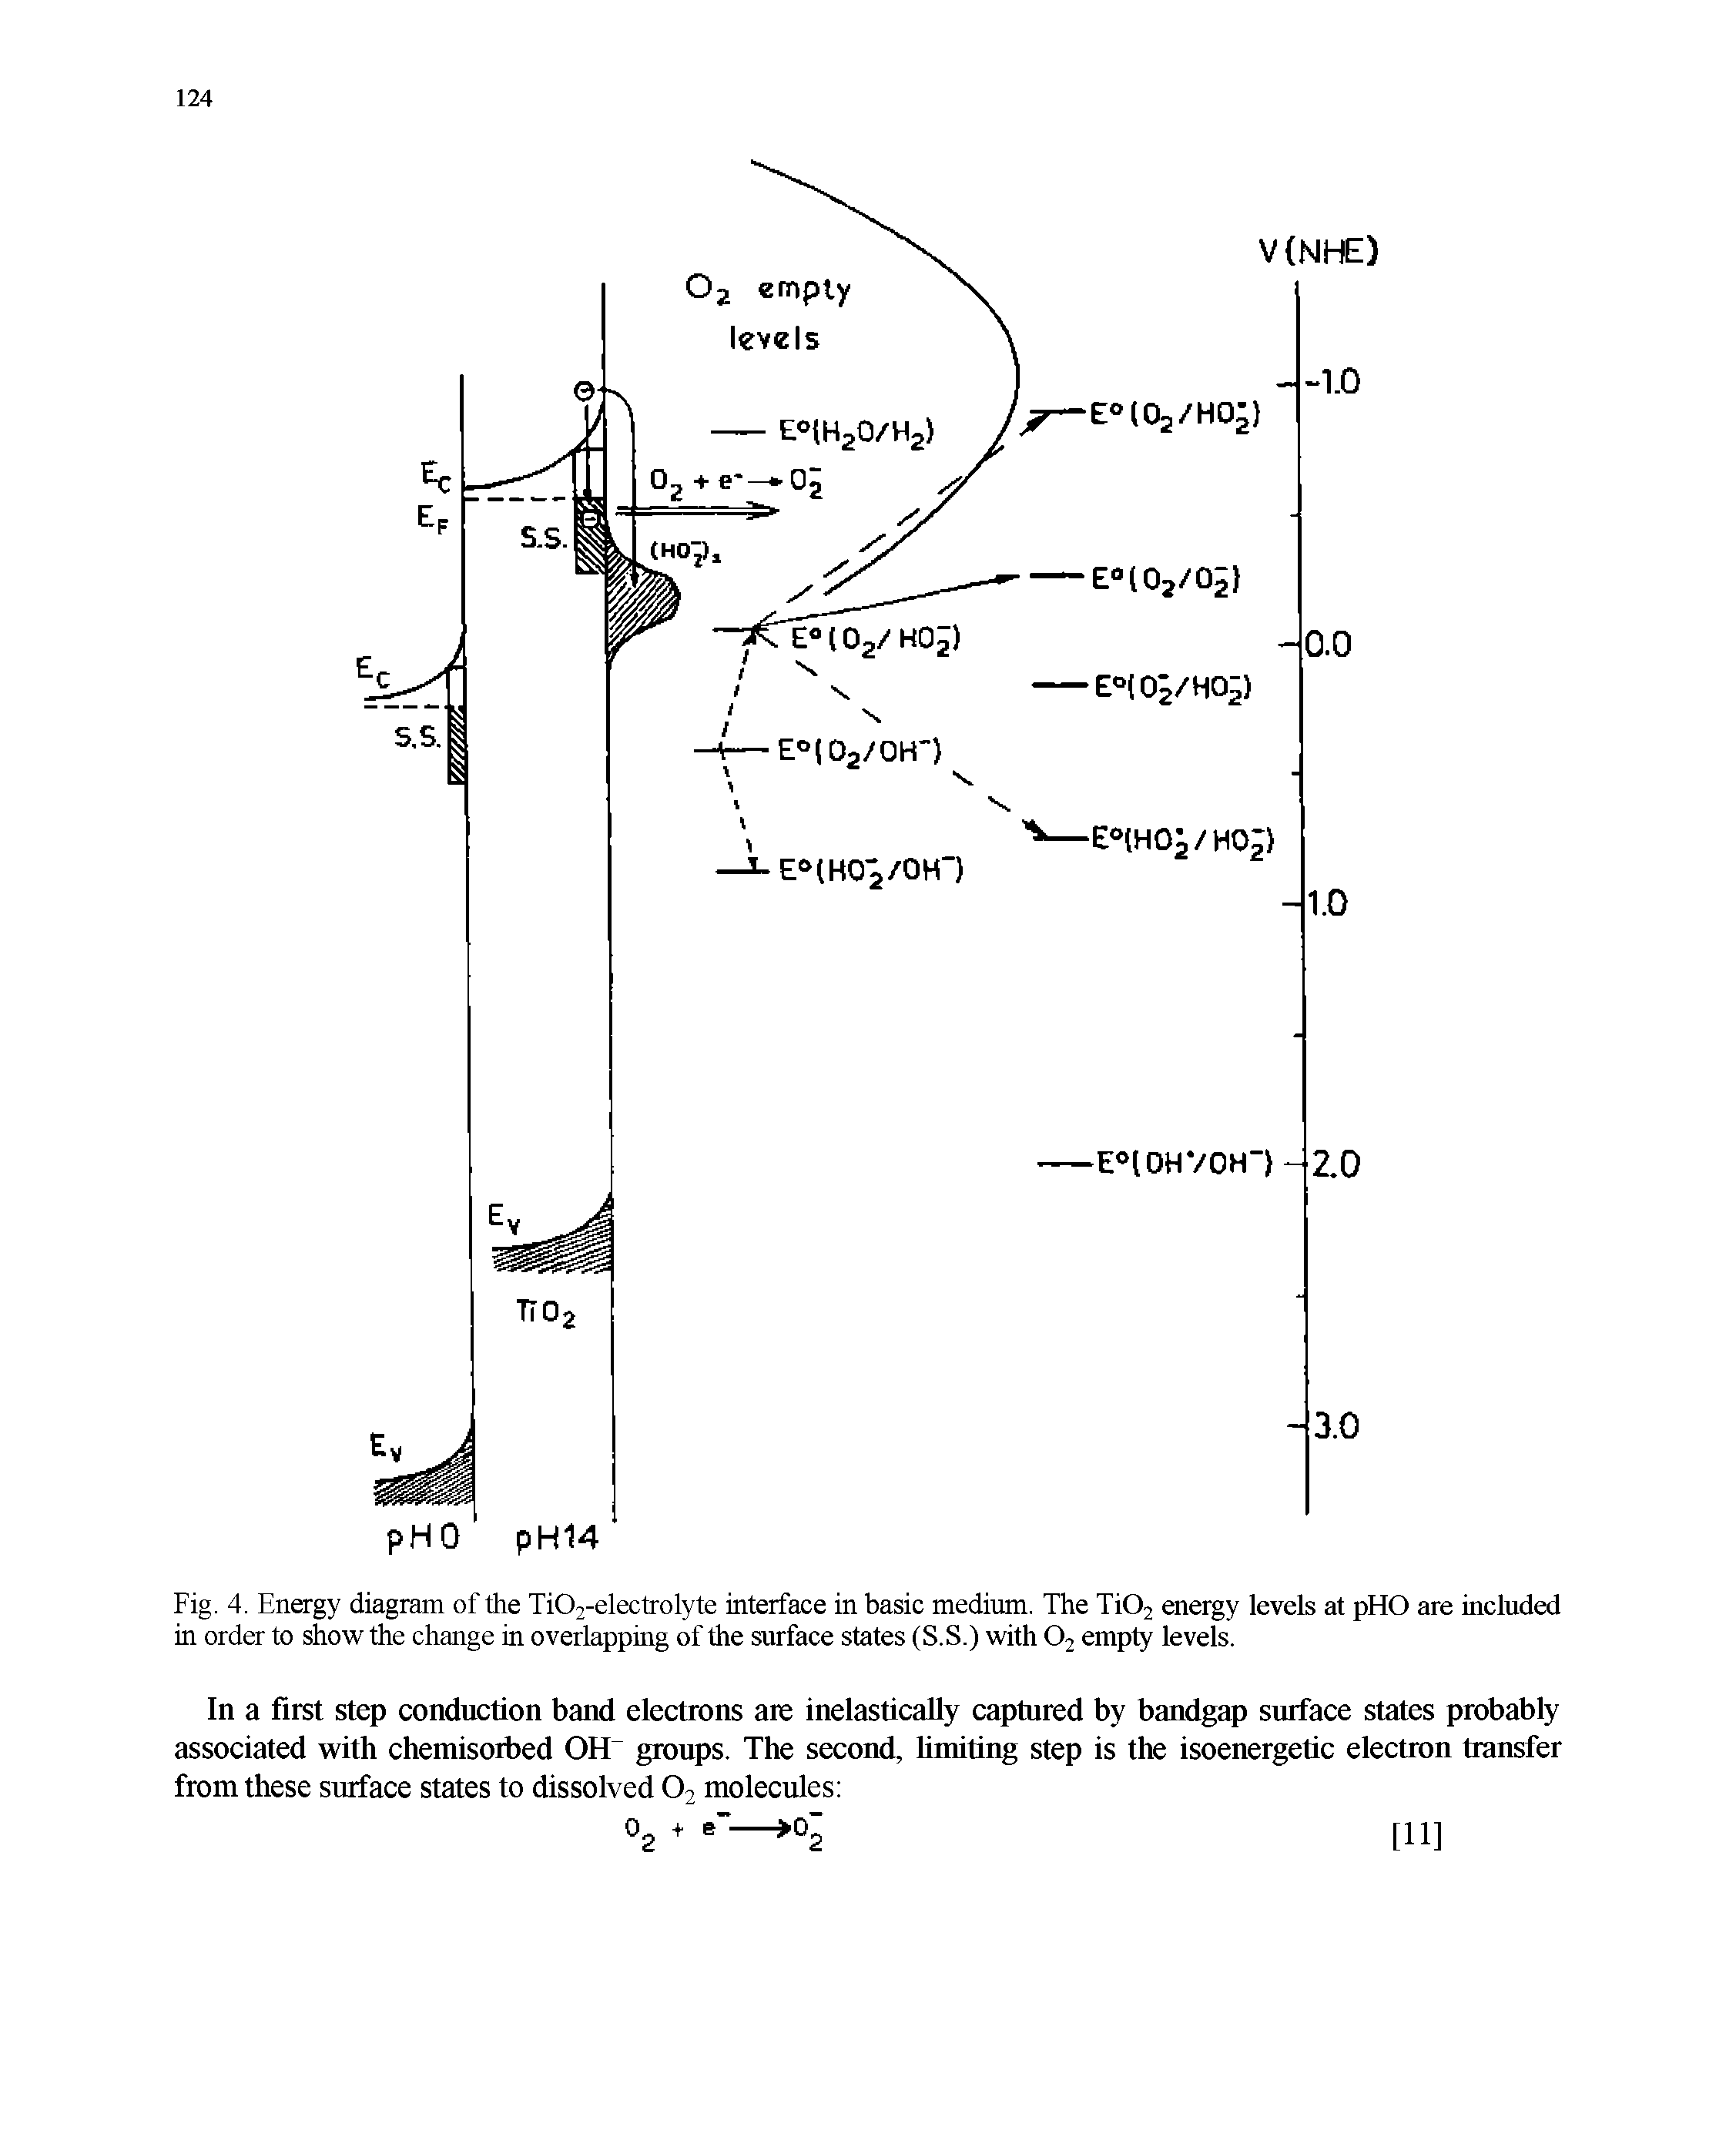 Fig. 4. Energy diagram of the Ti02-electrolyte interface in basic medium. The Ti02 energy levels at pHO are included in order to show the change in overlapping of the surface states (S.S.) with 02 empty levels.